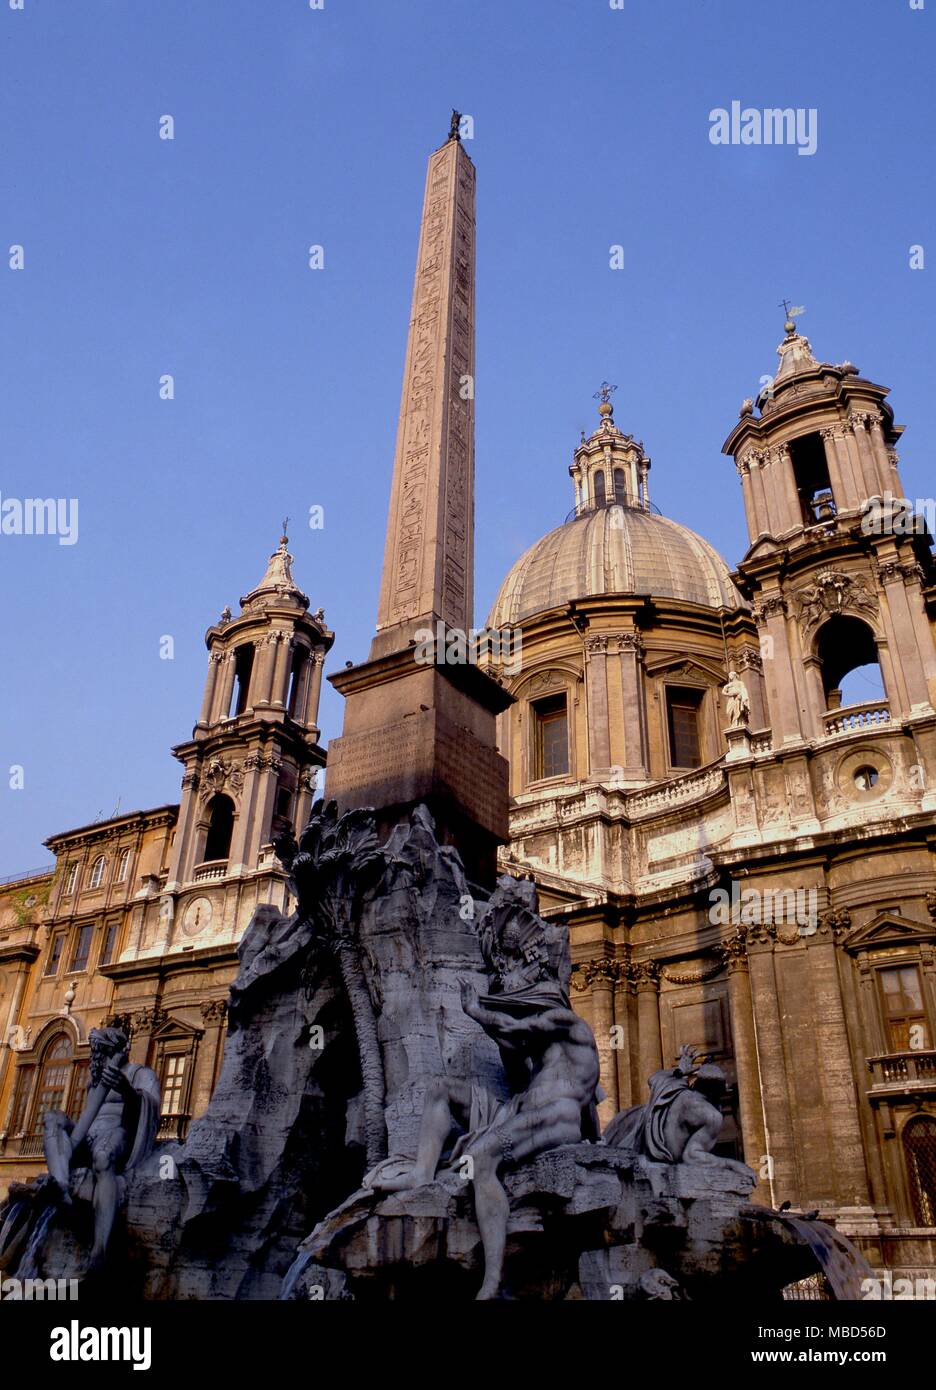 Rome, the Piazza Navona. The church of Sant'Agnese in Agone behind the Fountain of the Four Rivers. Stock Photo